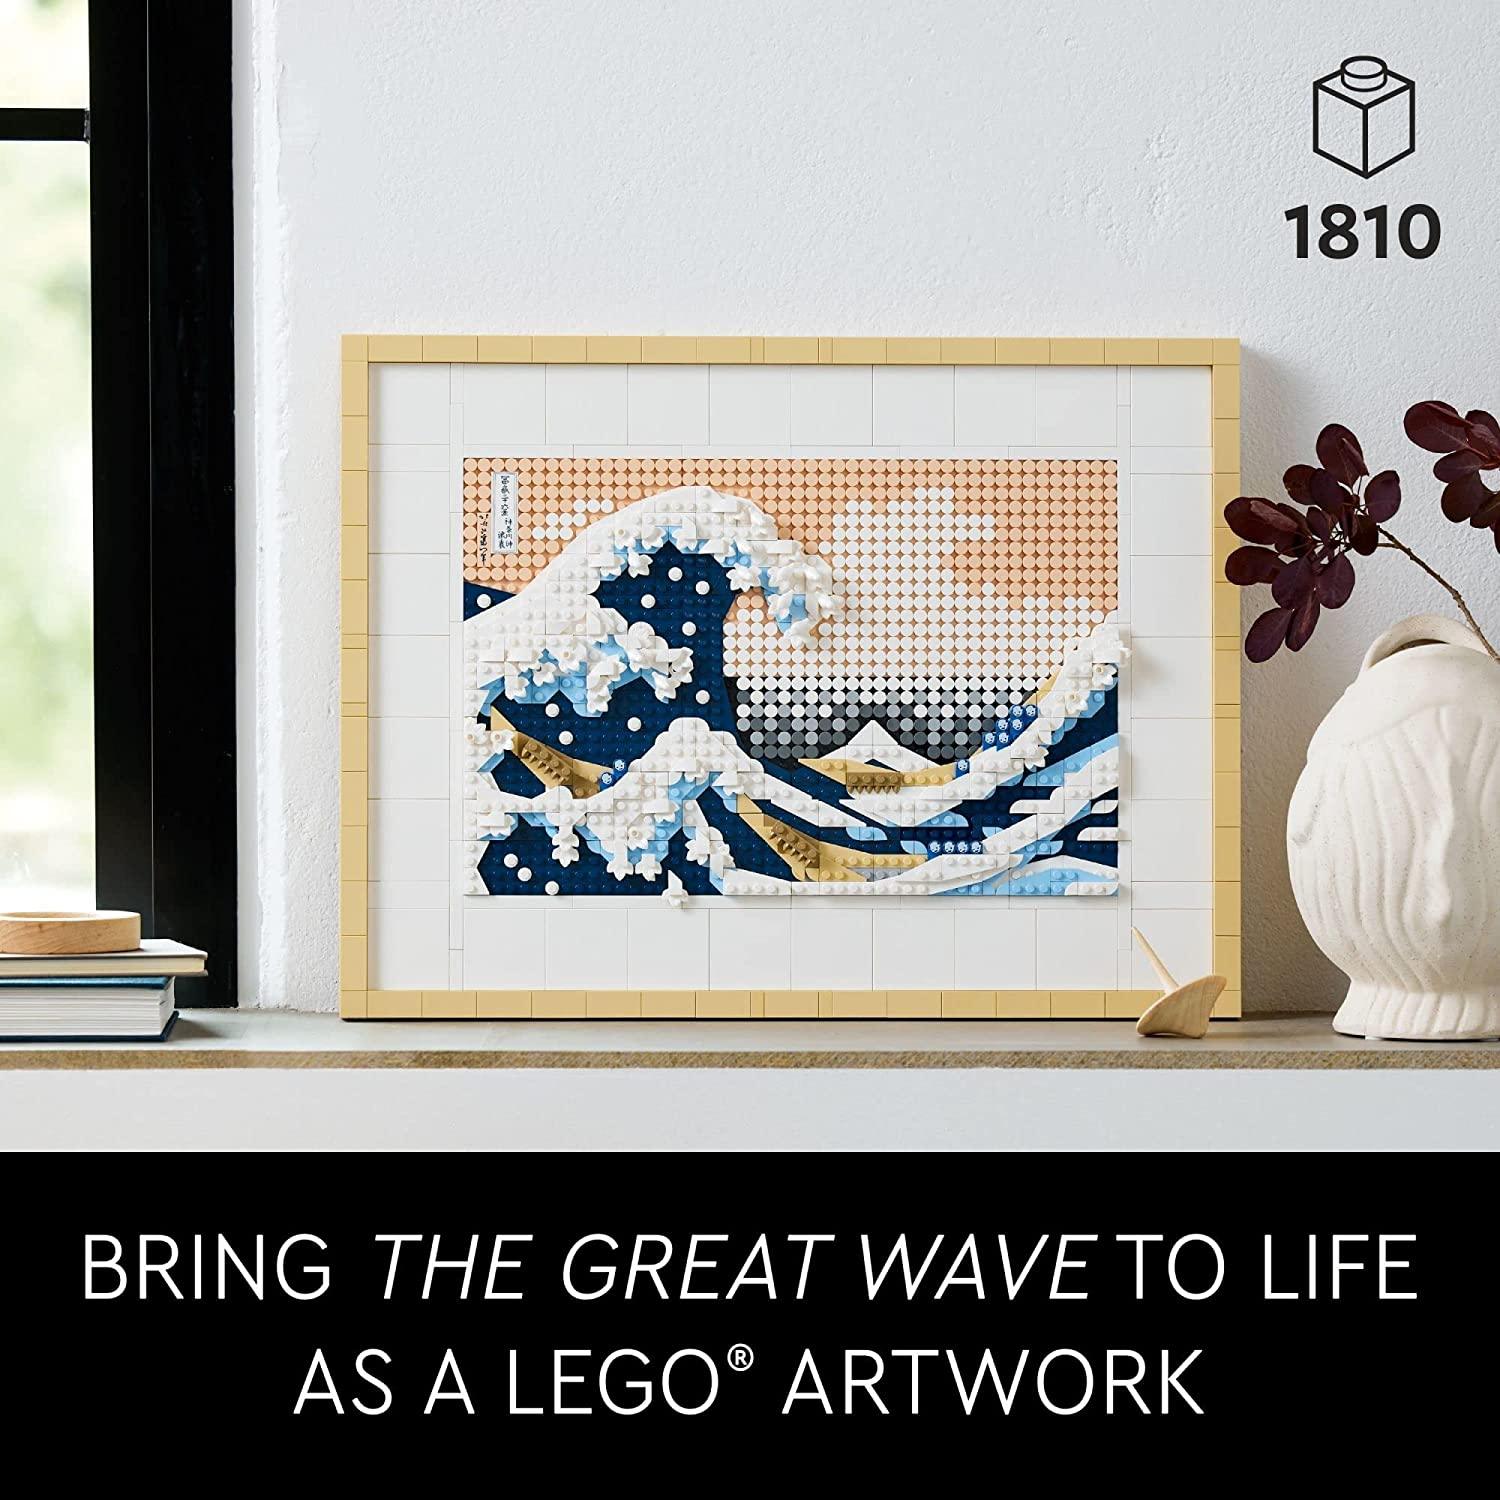 LEGO Art Hokusai – The Great Wave 31208, 3D Japanese Wall Art Craft Kit, Framed Ocean Canvas (1810 pcs) - BumbleToys - 14 Years & Up, 18+, Adults, Boys, Girls, LEGO, OXE, Pre-Order